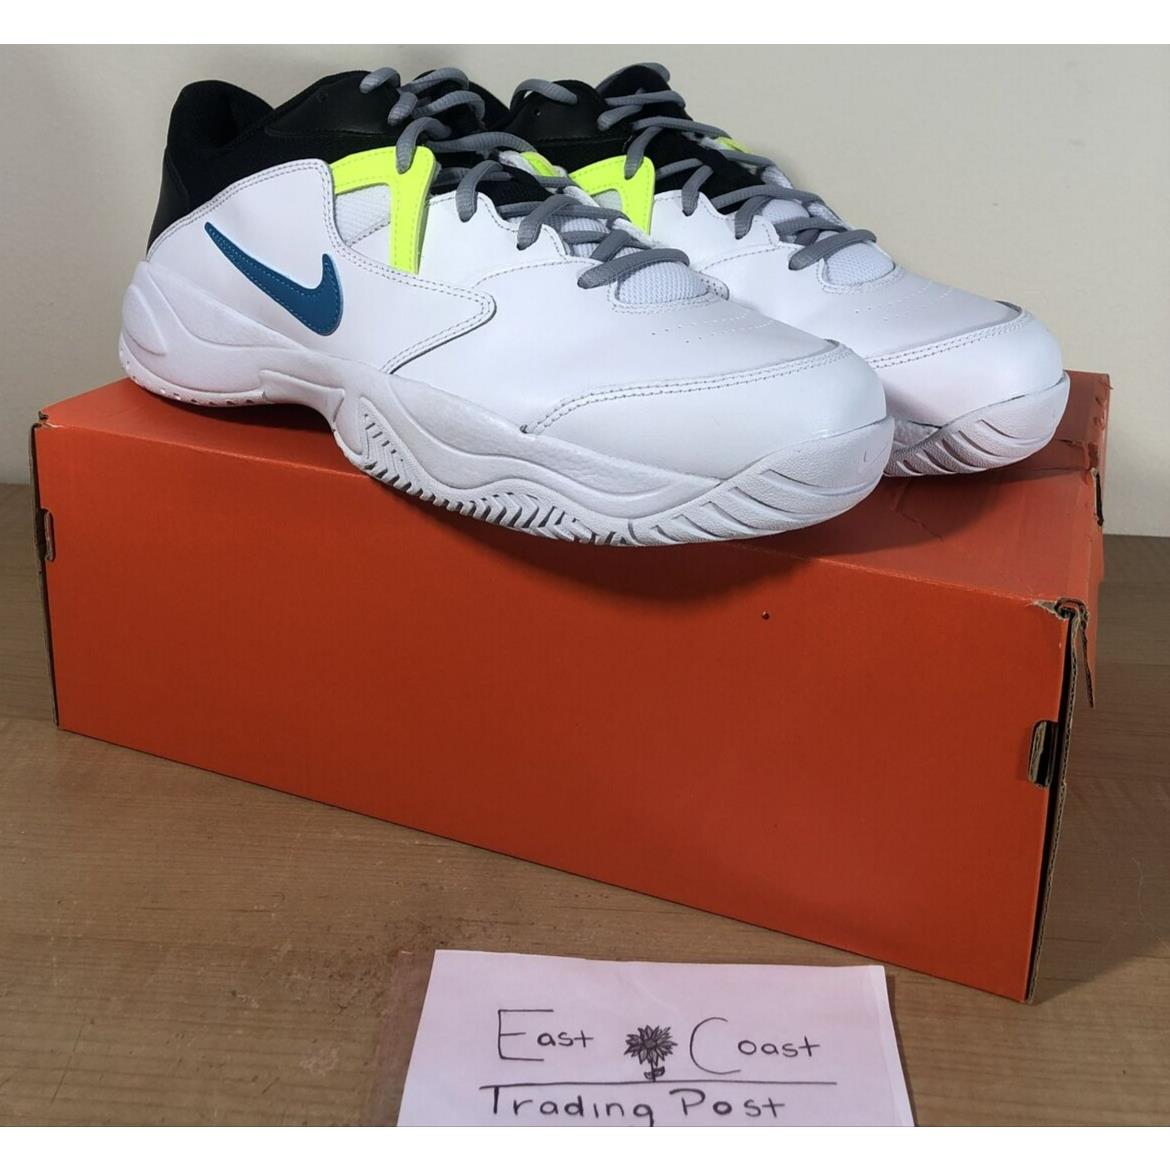 Nike Court Lite 2 Shoes Sneakers Size 12 AR8836104 White Neo Turq Hot Lime